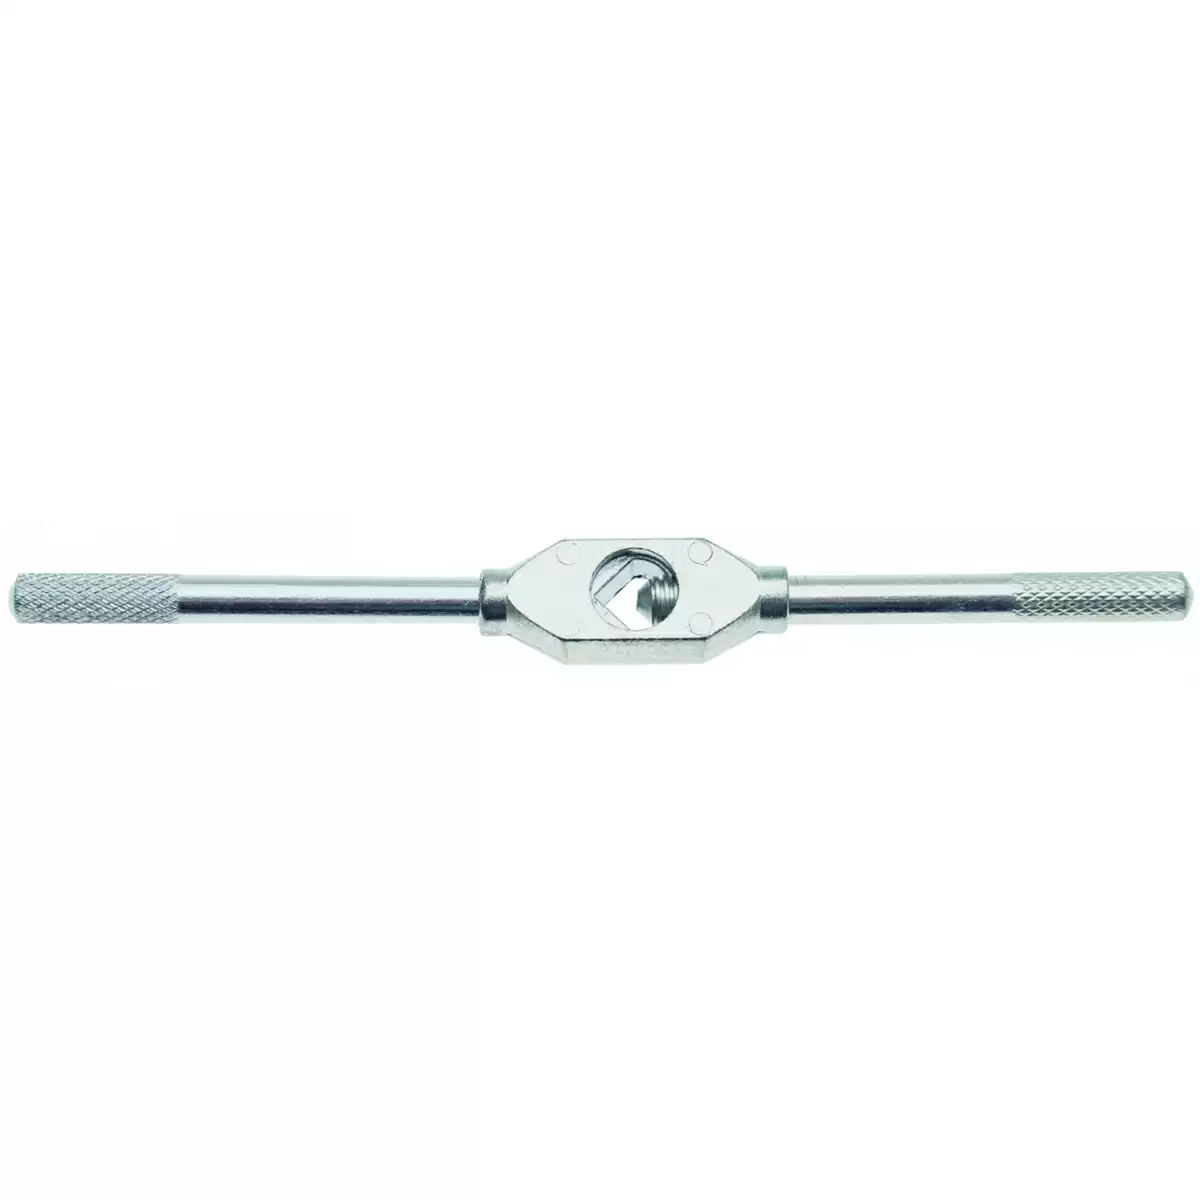 Tap Wrench for BGS 1987 - Code BGS1987-1 - image